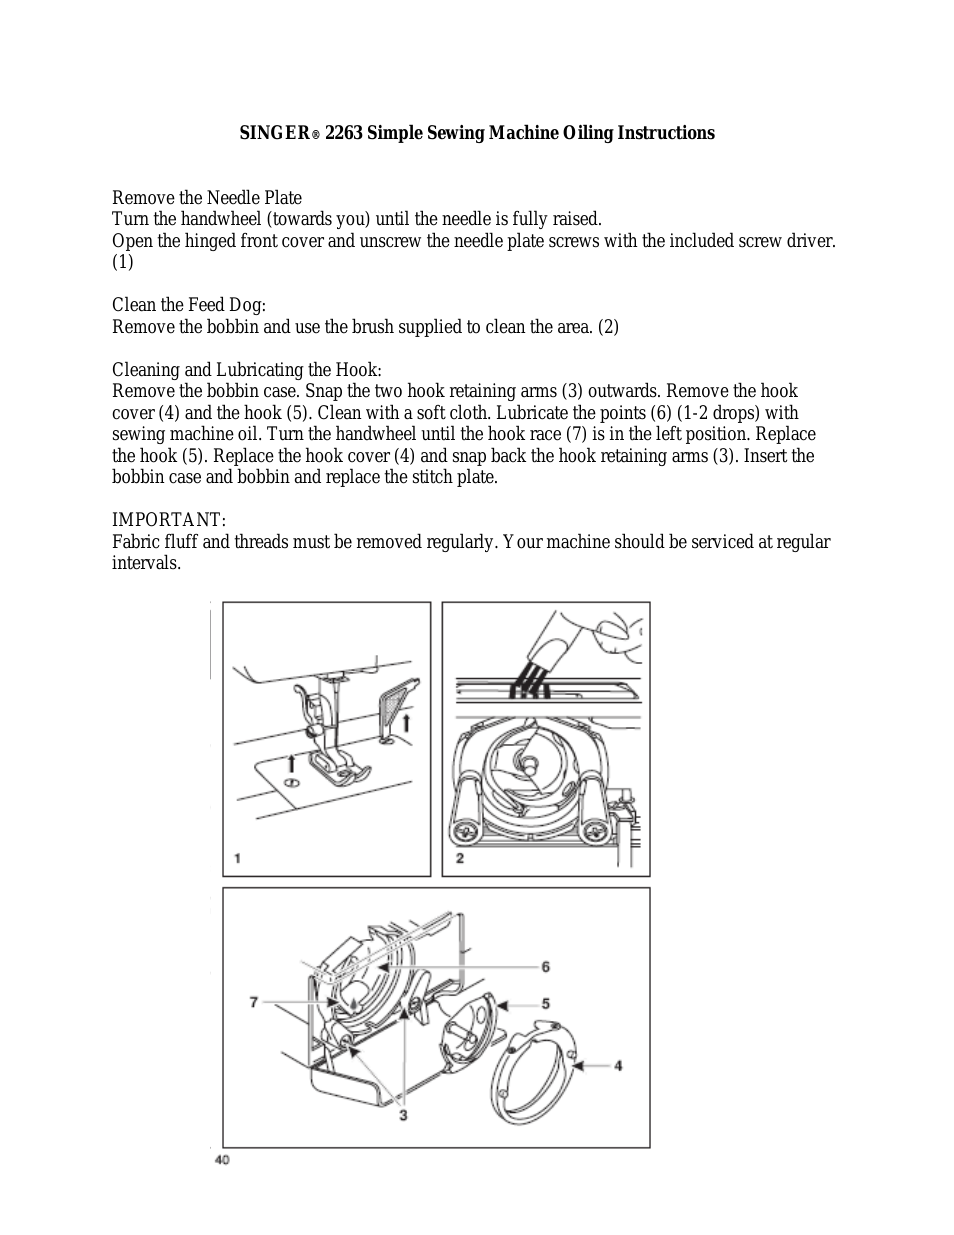 2273 Oiling SIMPLE Instruction Manual